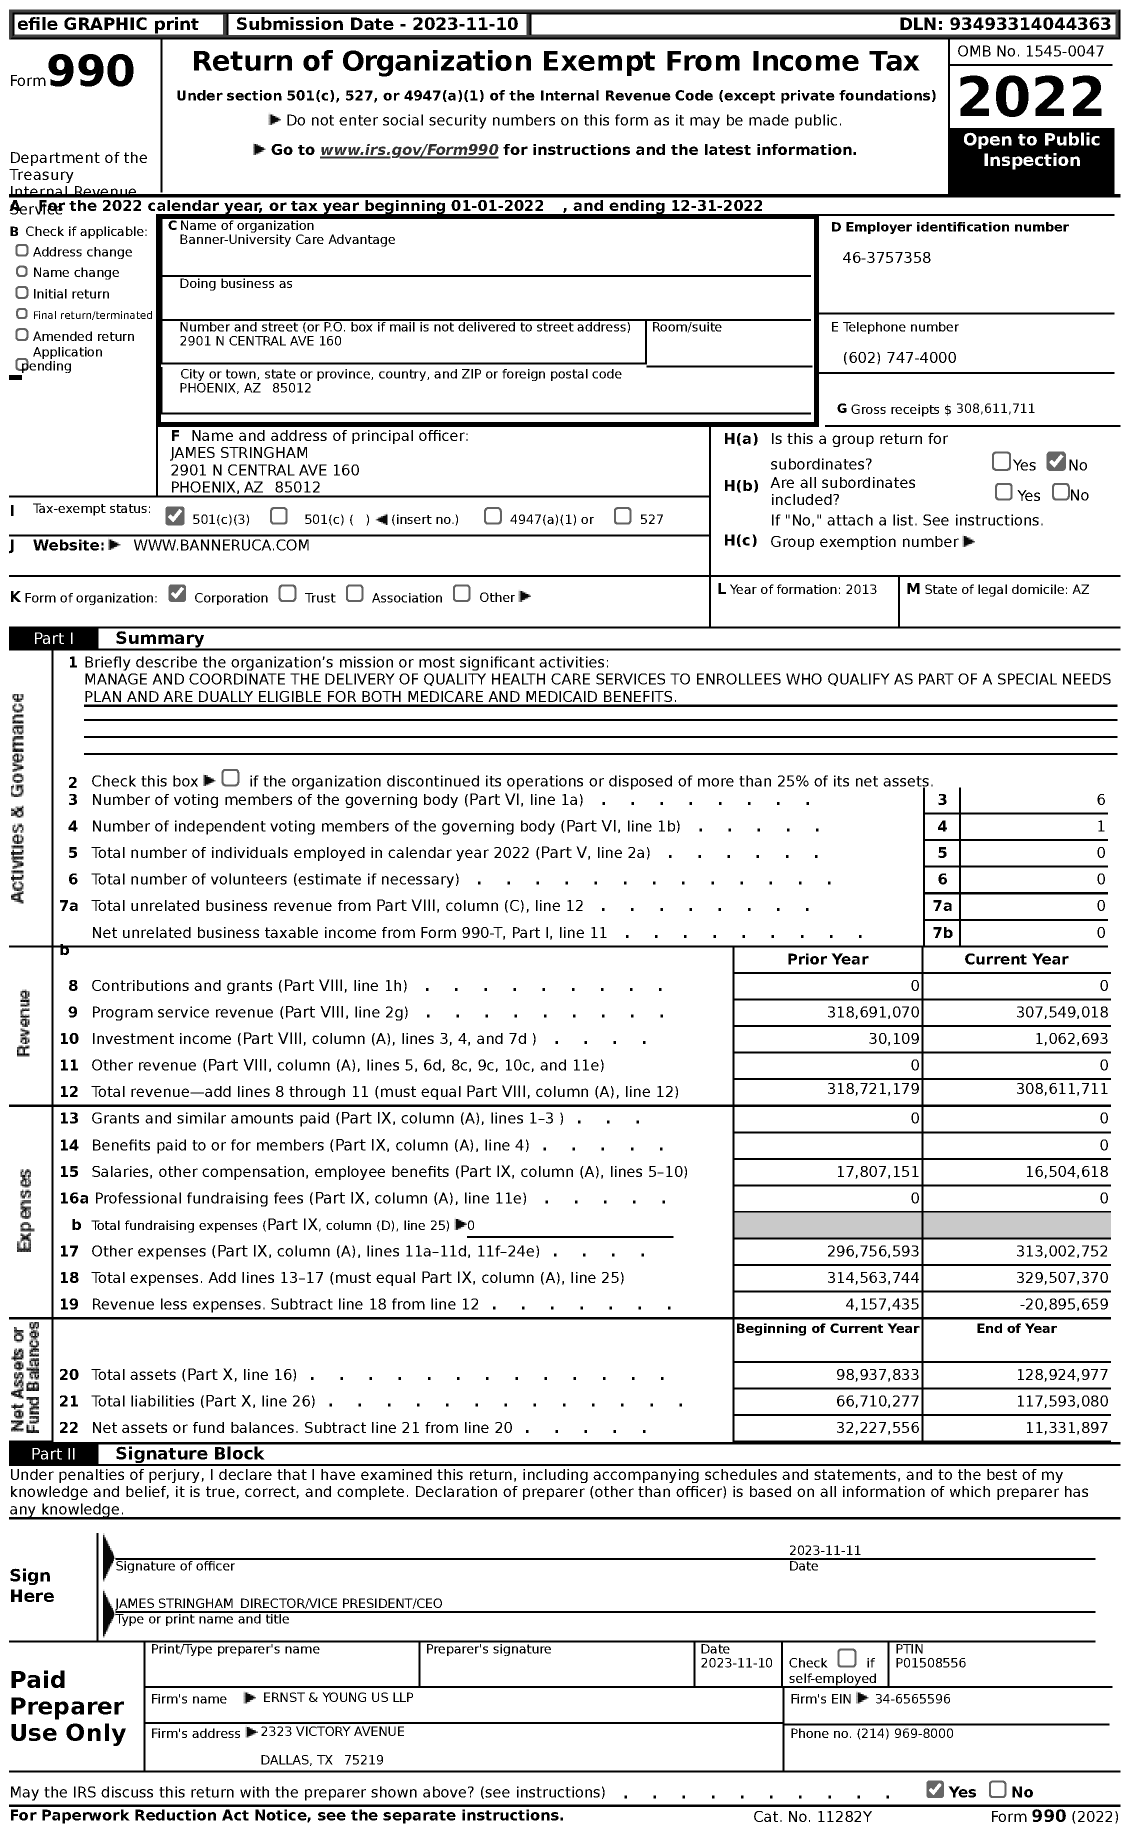 Image of first page of 2022 Form 990 for Banner-University Care Advantage